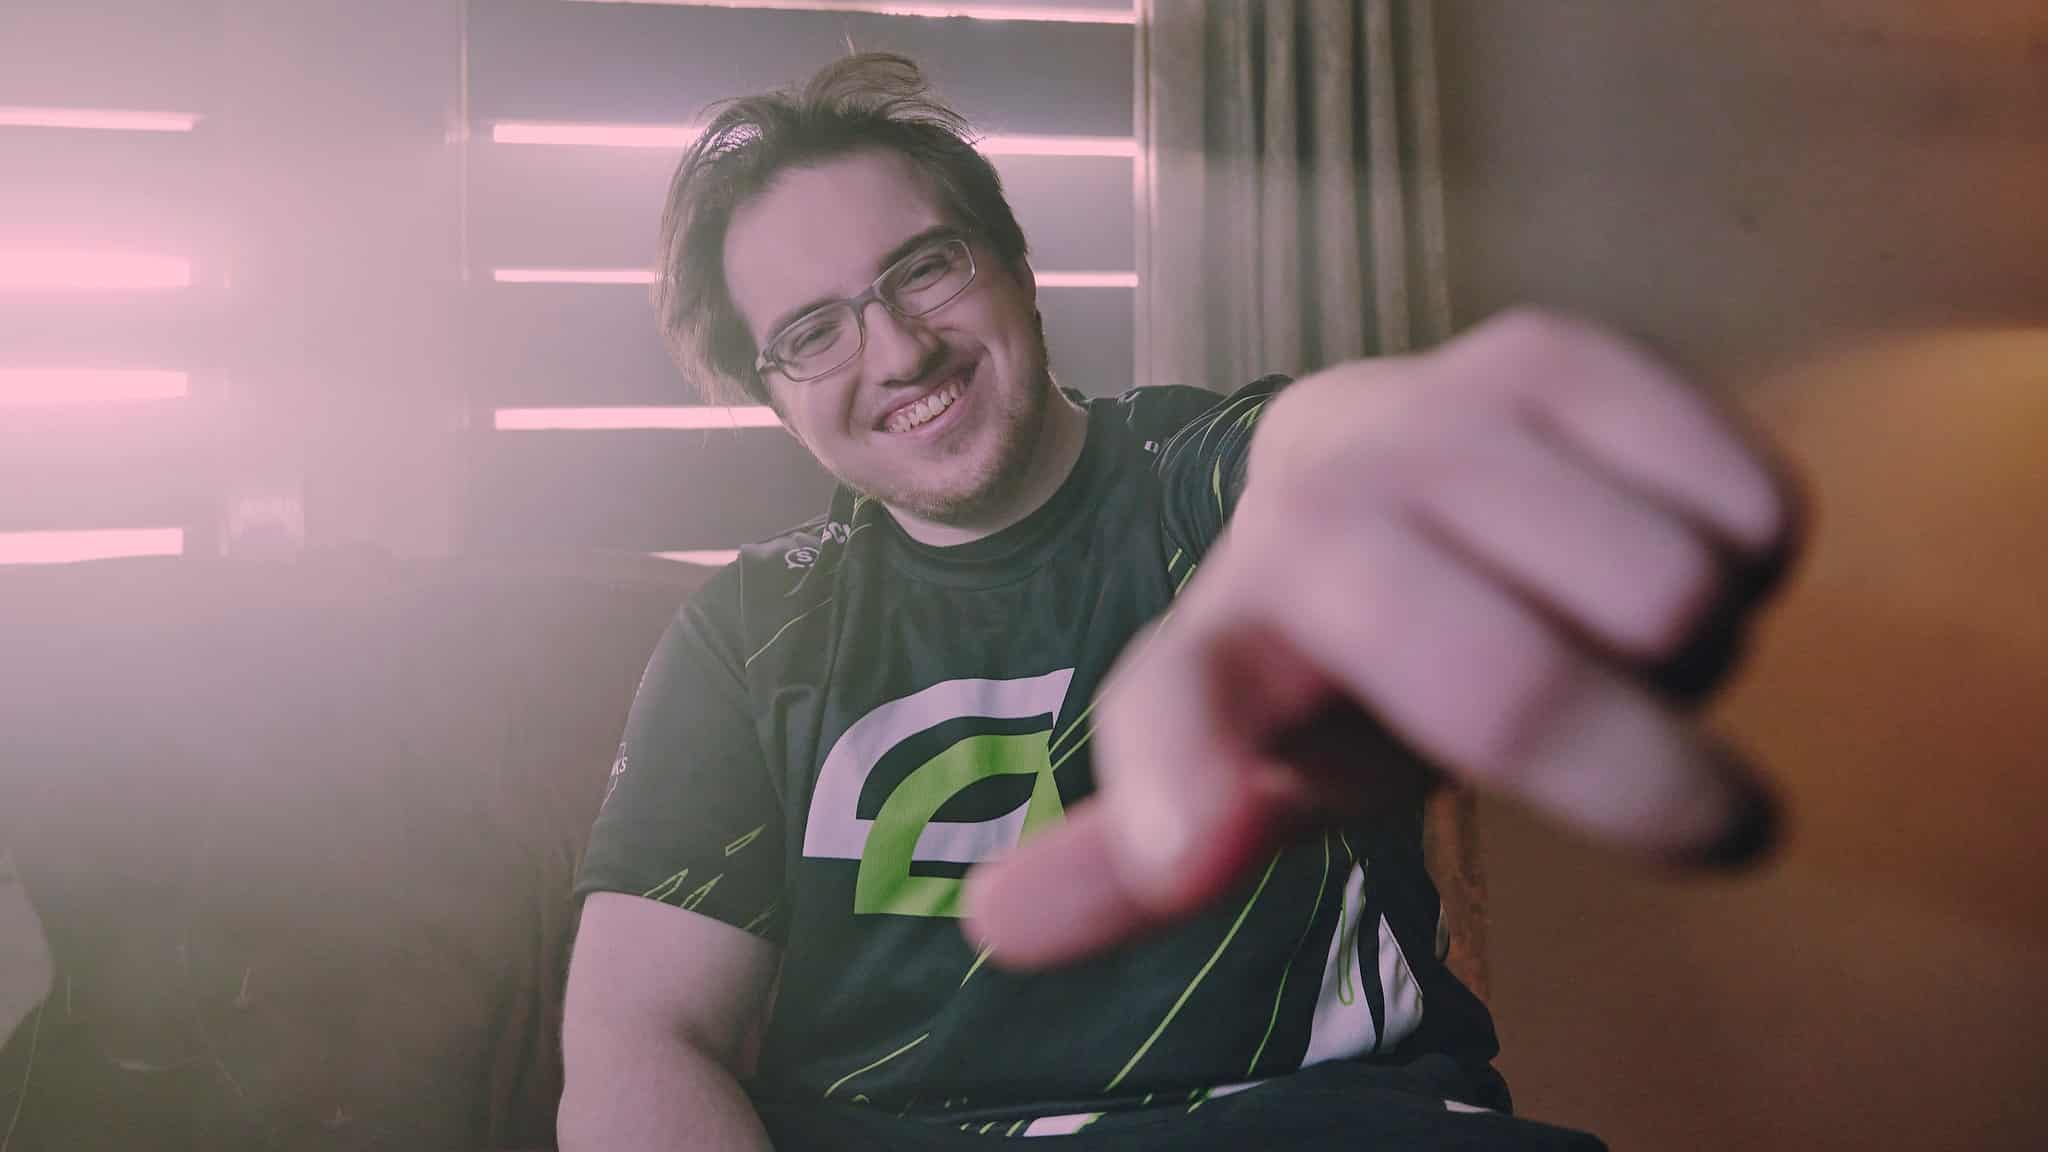 Optic yay points his finger like a gun gangster style at the camera